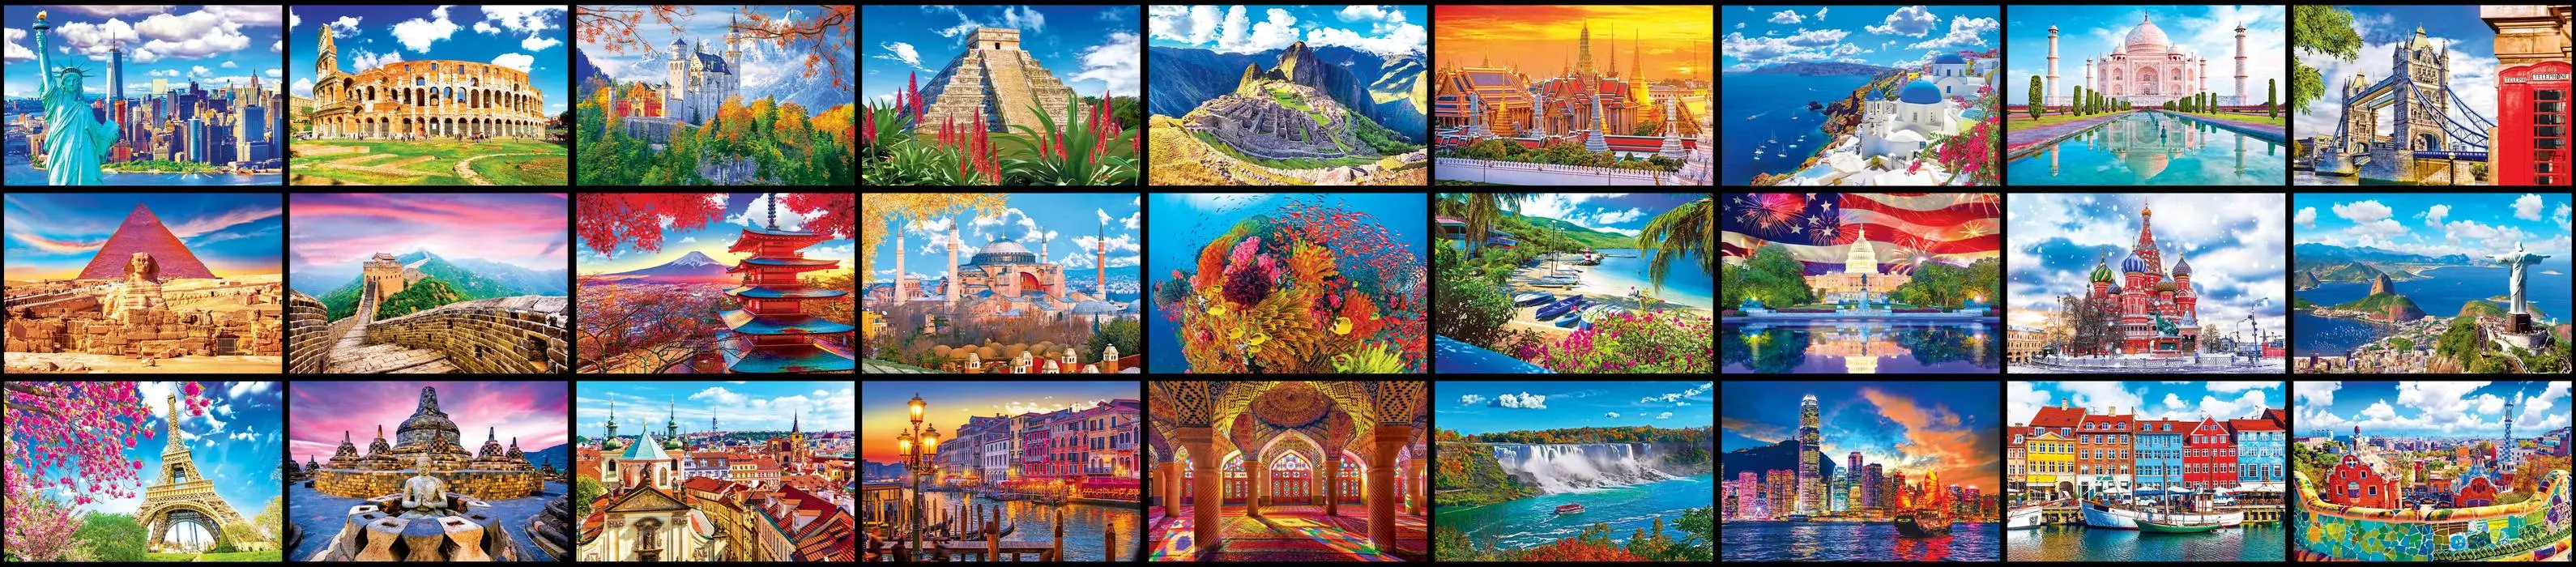 The 51,300 pieces depicts the 27 Wonders of the World (